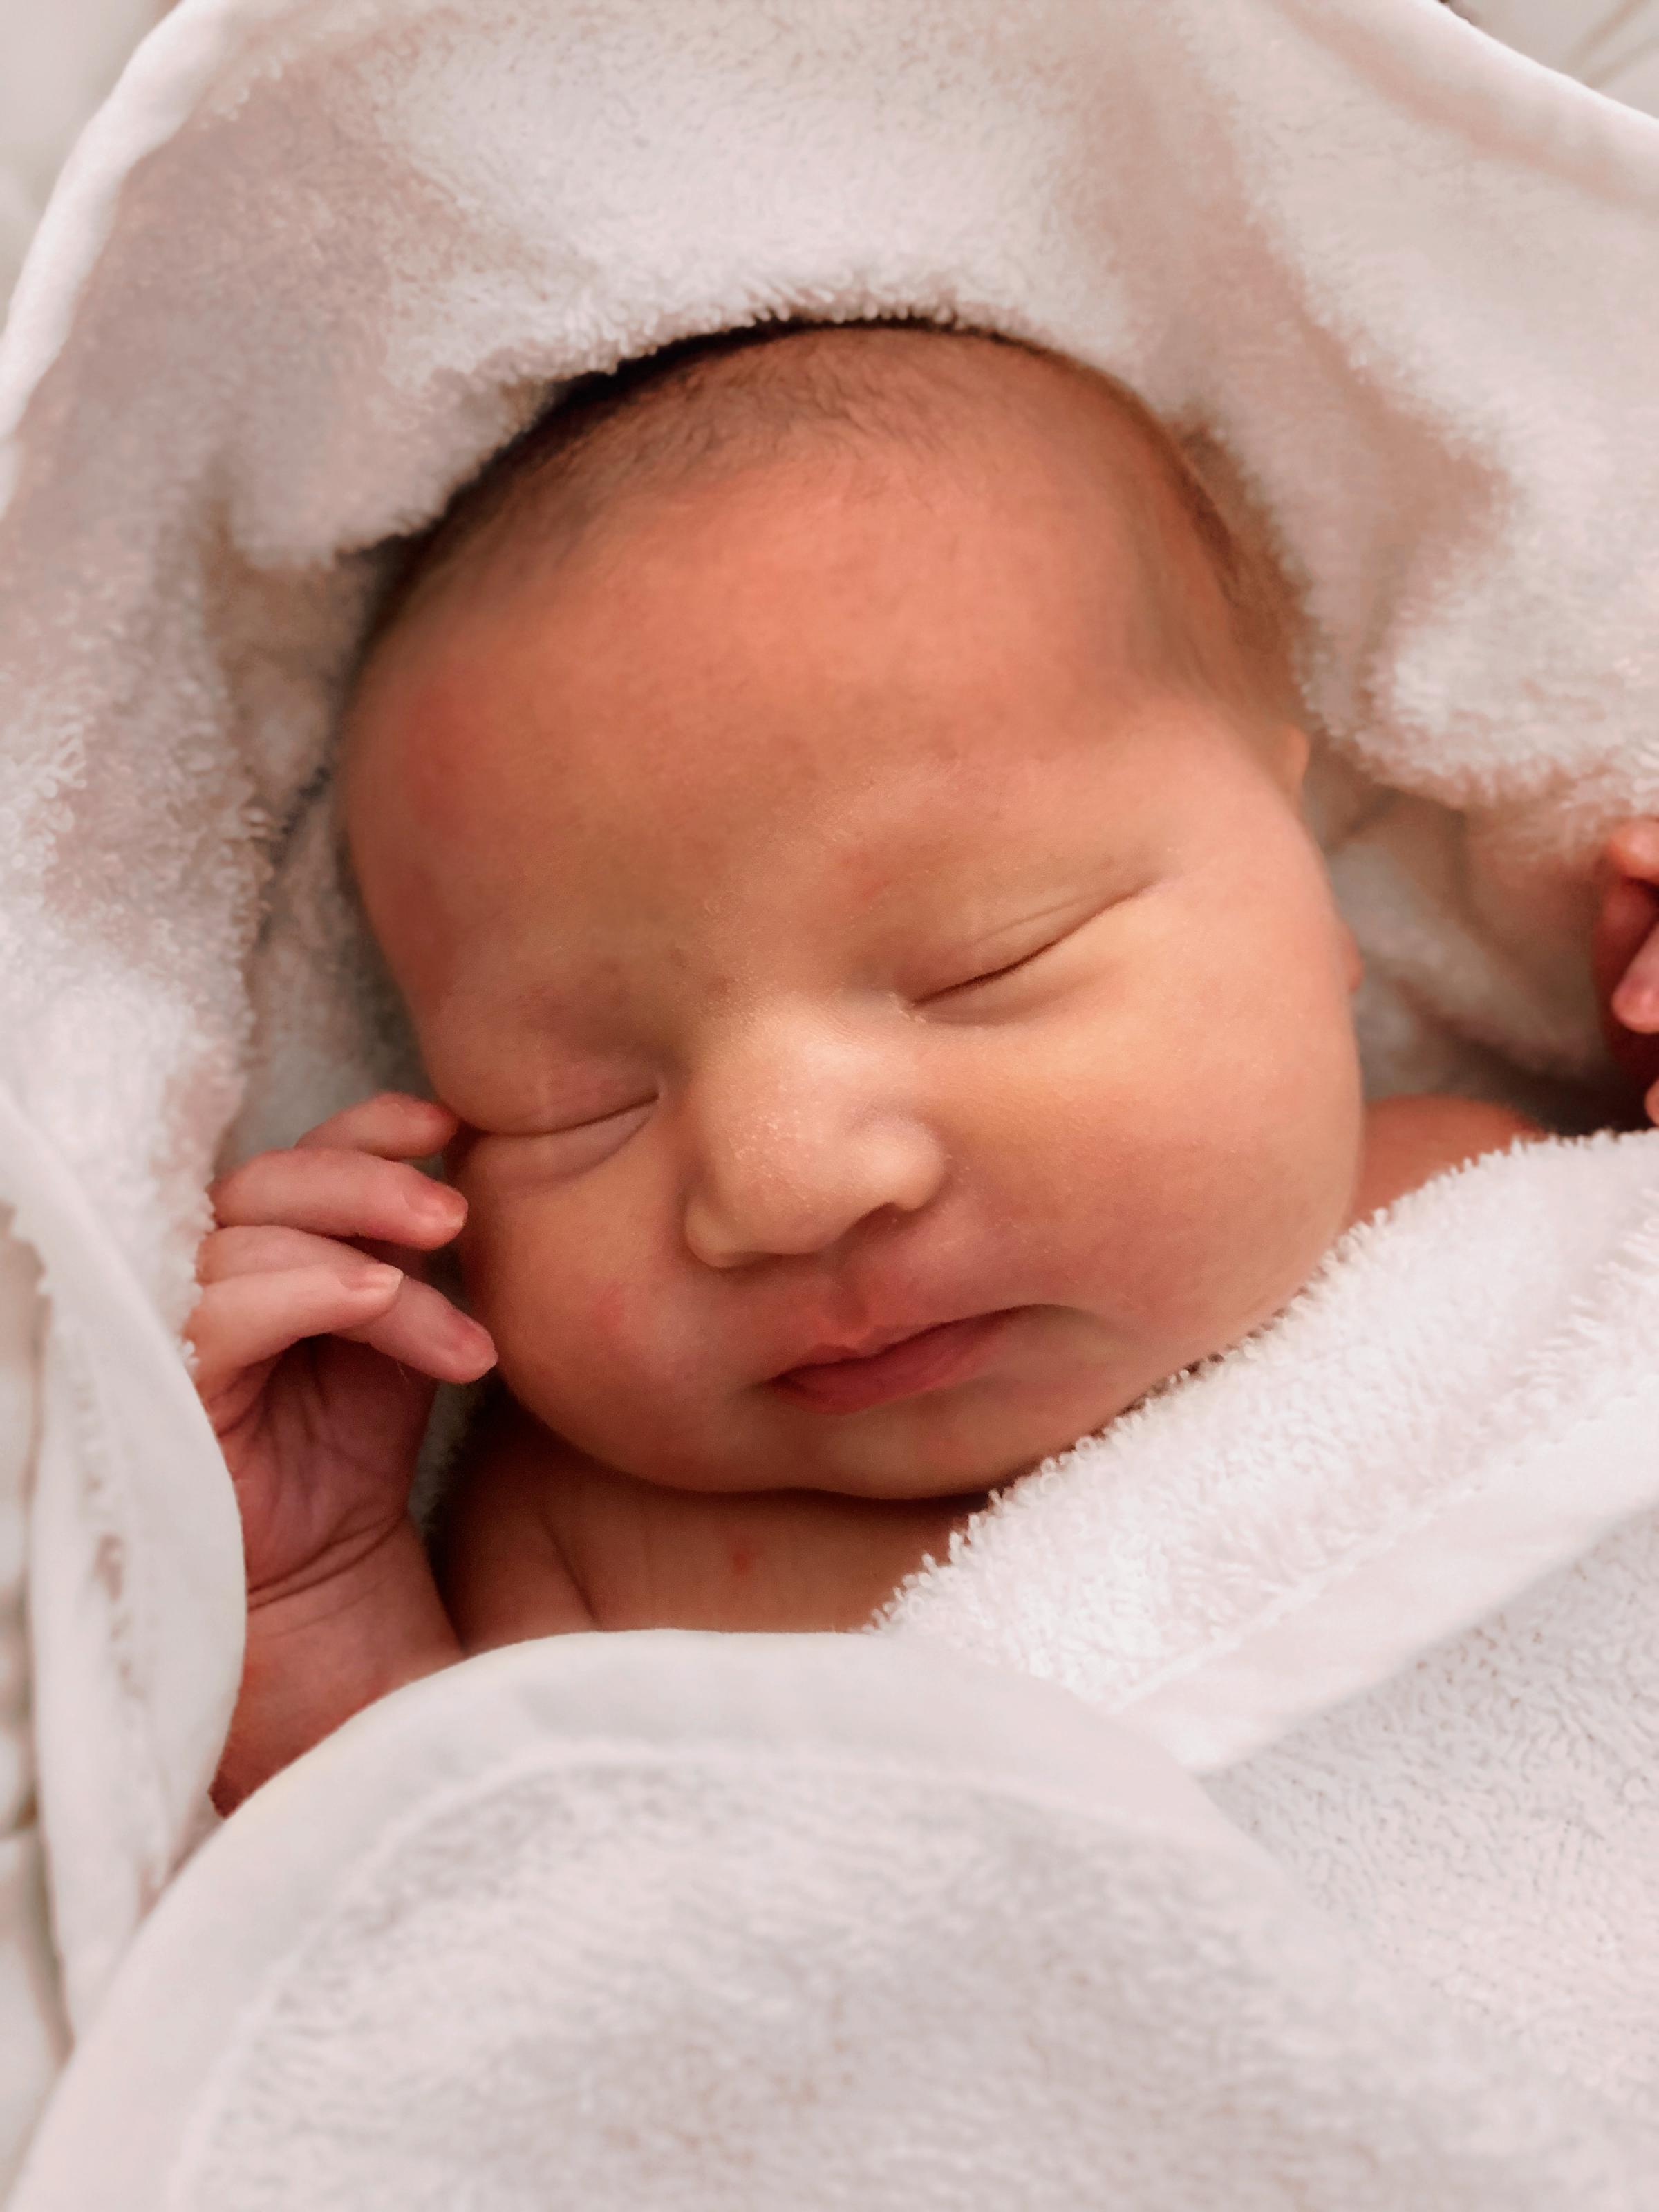 Isabella-Grace Finn-Pickering, of Dallam, born July 16, weighing 8 lbs 3 oz